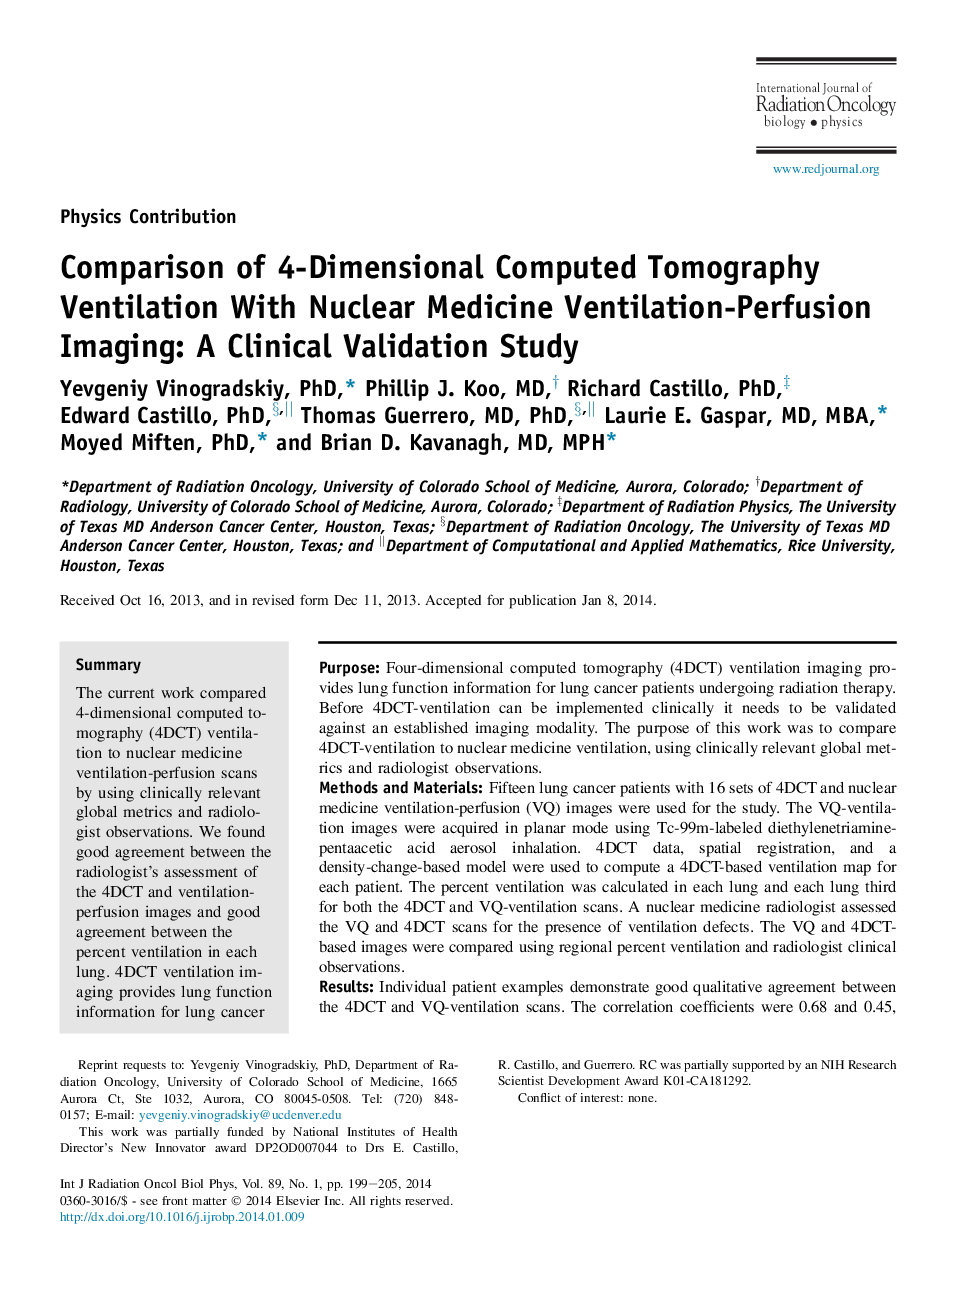 Comparison of 4-Dimensional Computed Tomography Ventilation With Nuclear Medicine Ventilation-Perfusion Imaging: A Clinical Validation Study